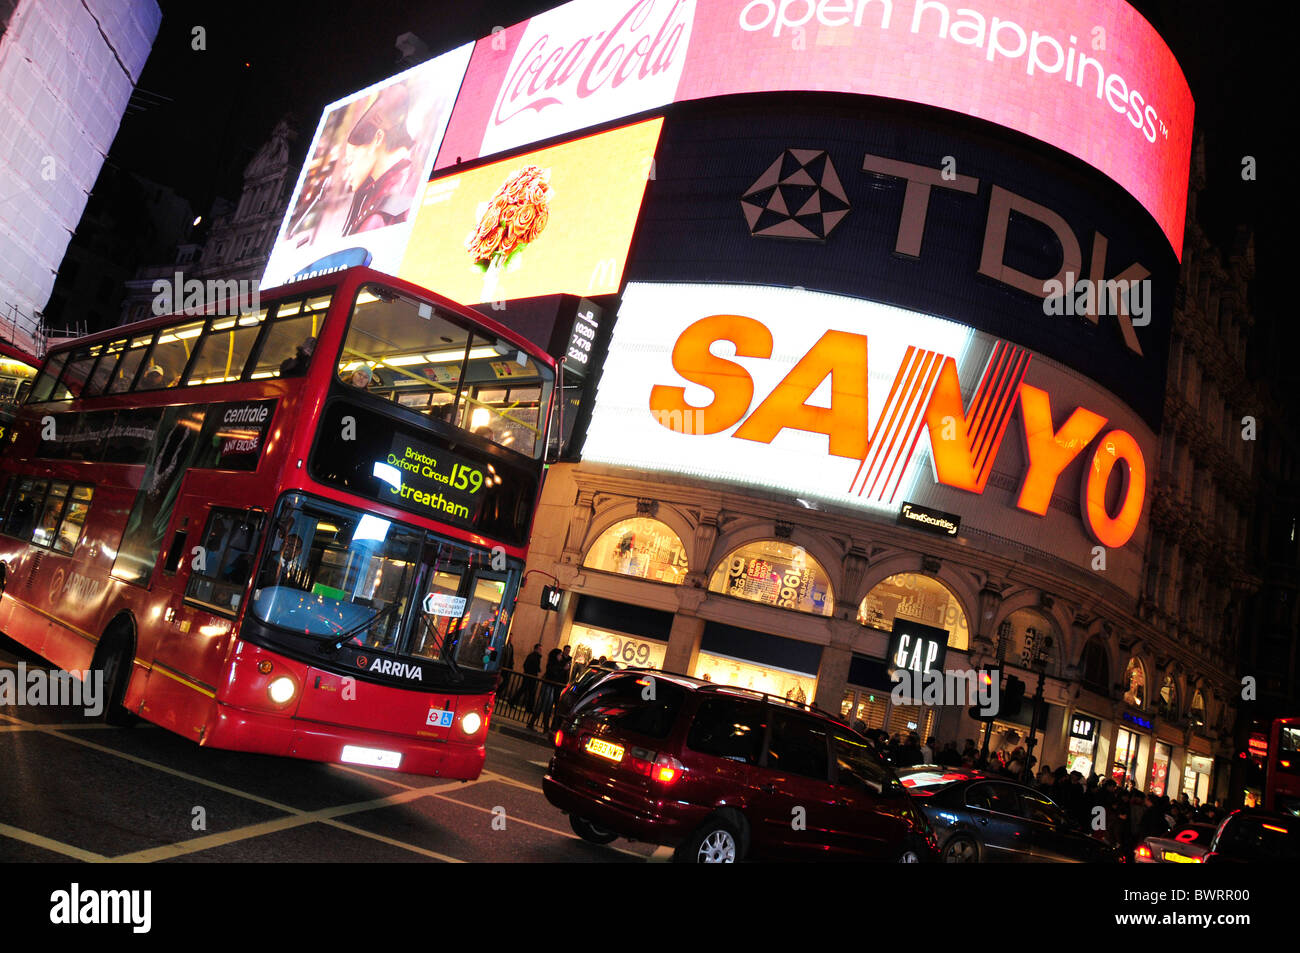 Red double-decker bus in front of neon signs on Piccadilly Circus at Night, London, England, United Kingdom, Europe Stock Photo